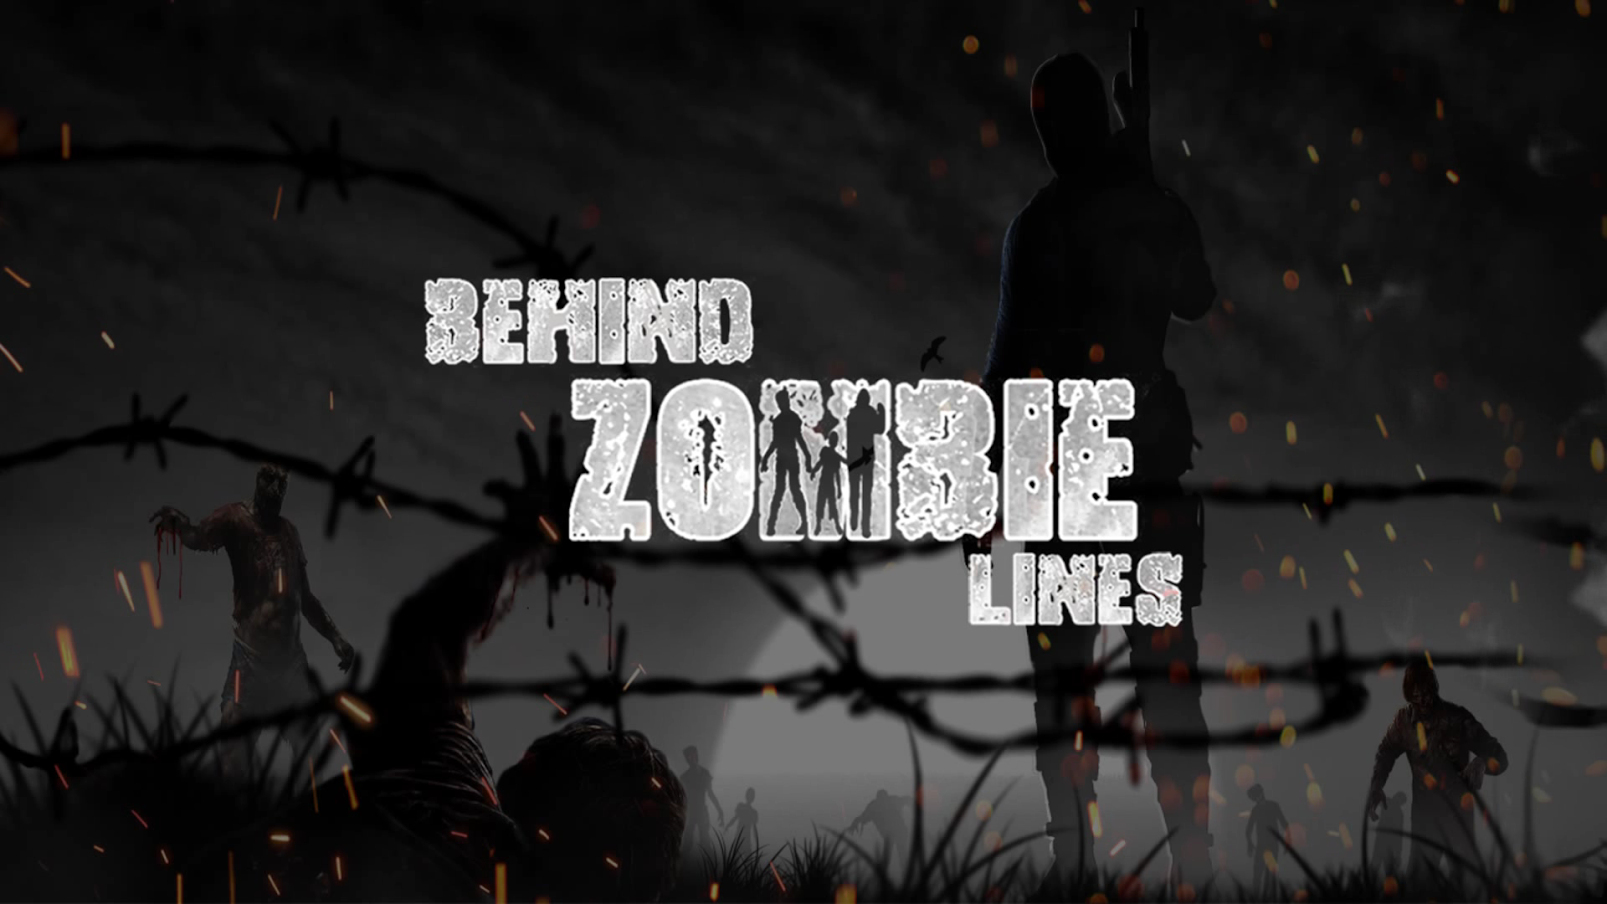 Behind Zombies Lines